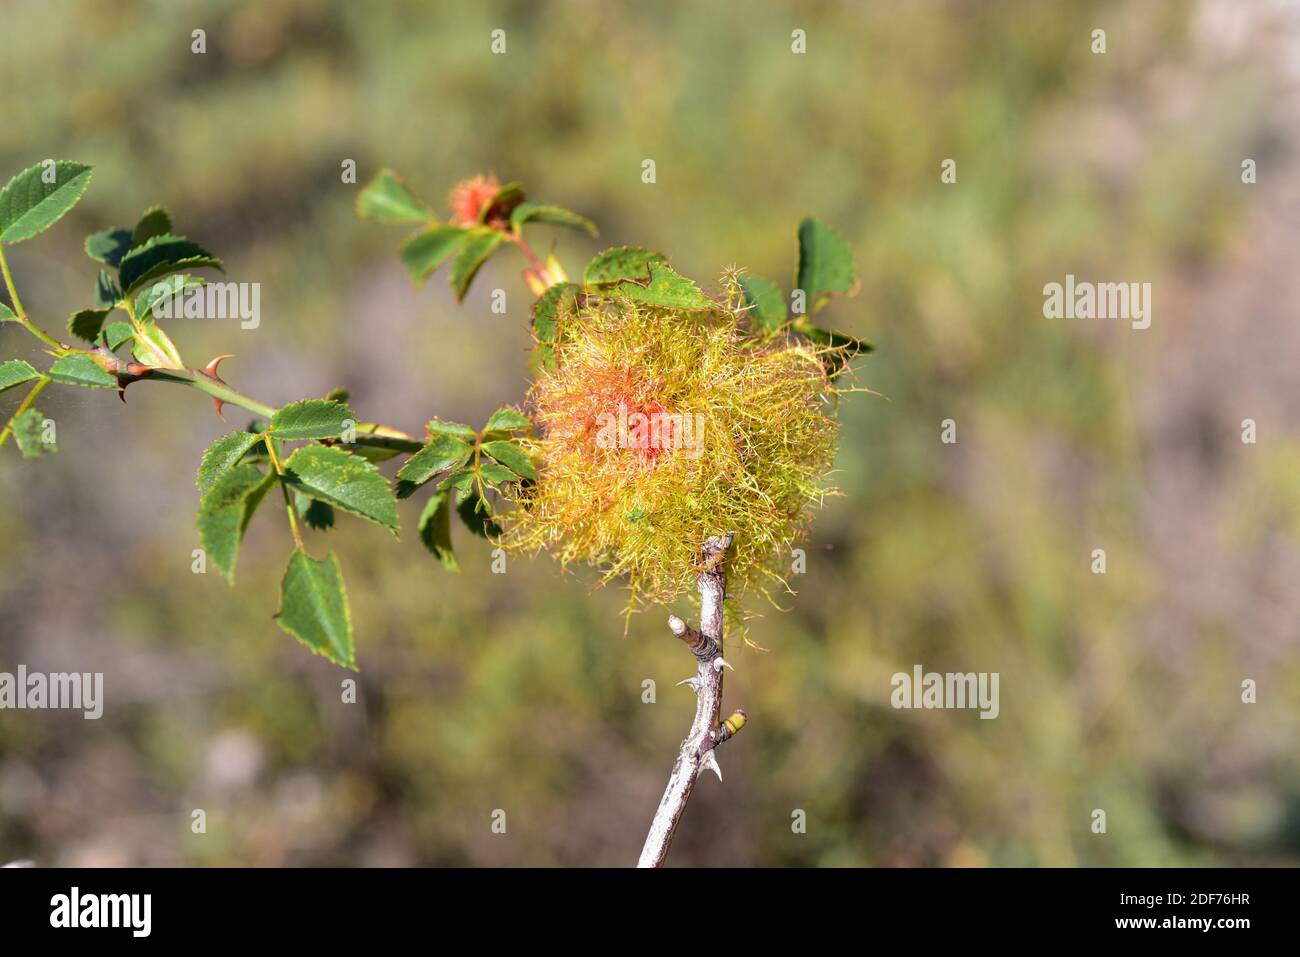 Rose bedeguar gall or moss gall is a gall produced by the hymenoptera insect (Diplolepis rosae) on Rosa canina. This photo was taken near Fortanete, Stock Photo